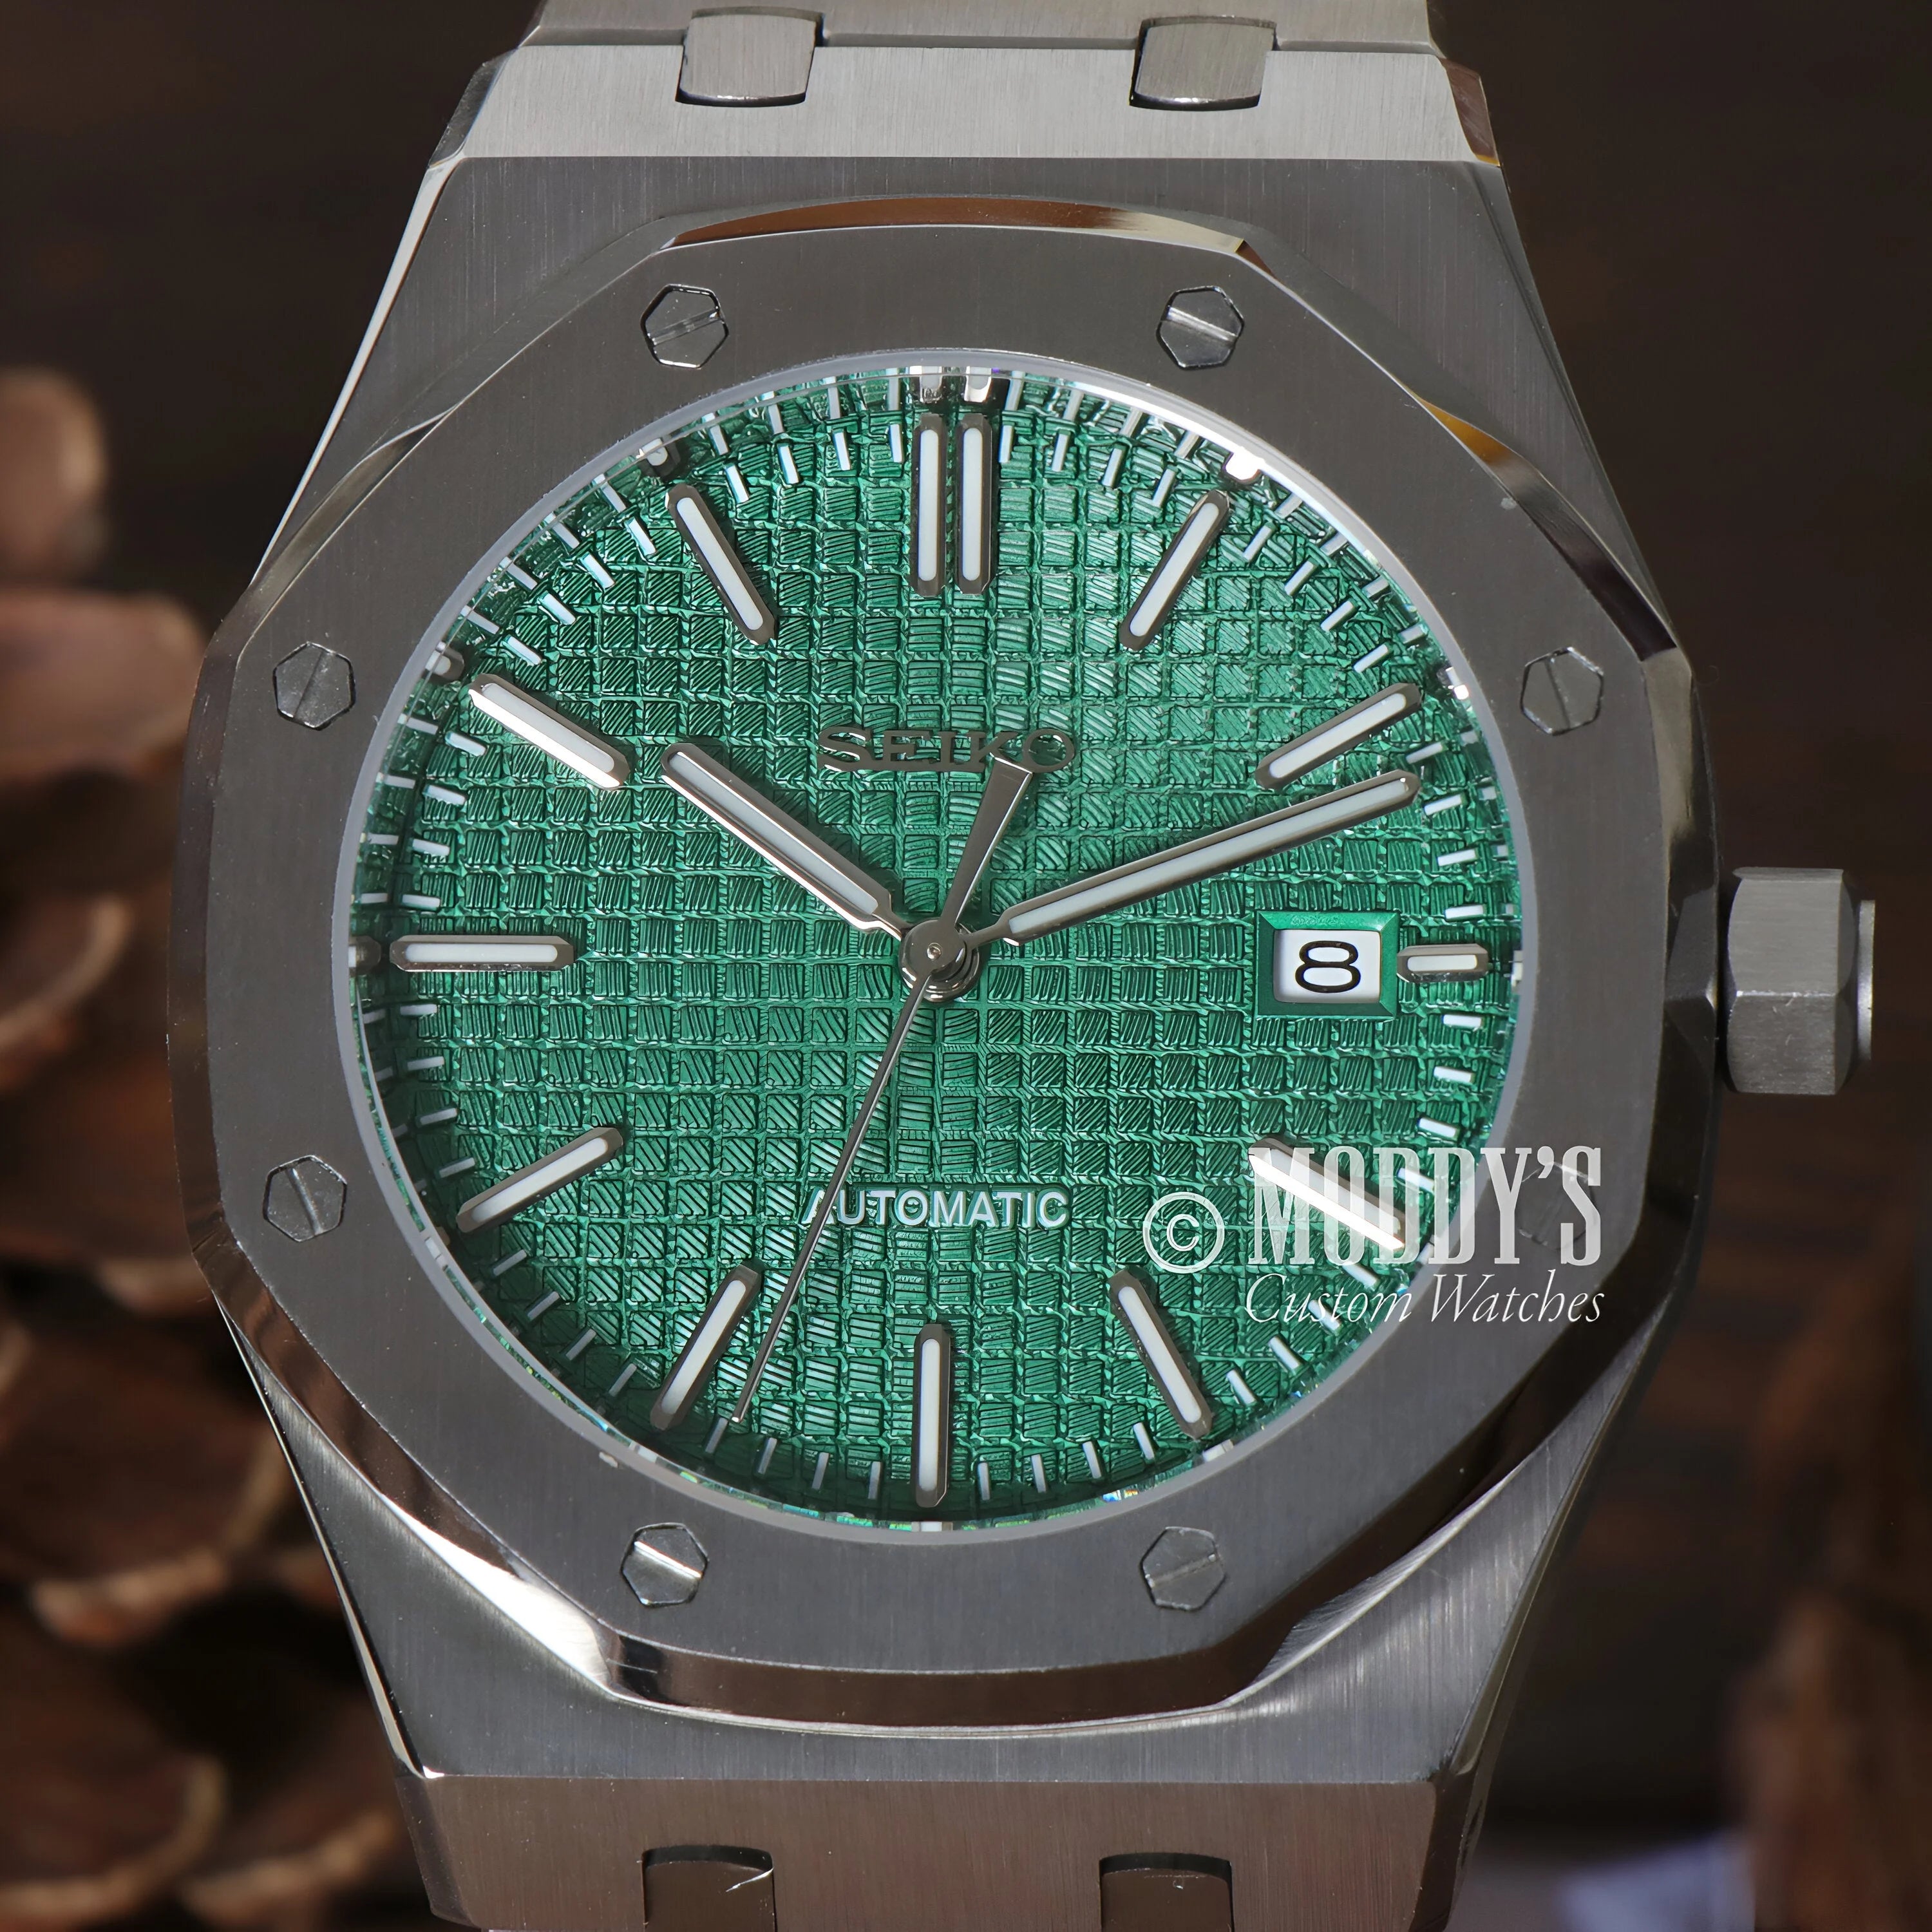 Luxury Seiko Mod Royal Oak Wristwatch With Green Textured Dial And Octagonal Case